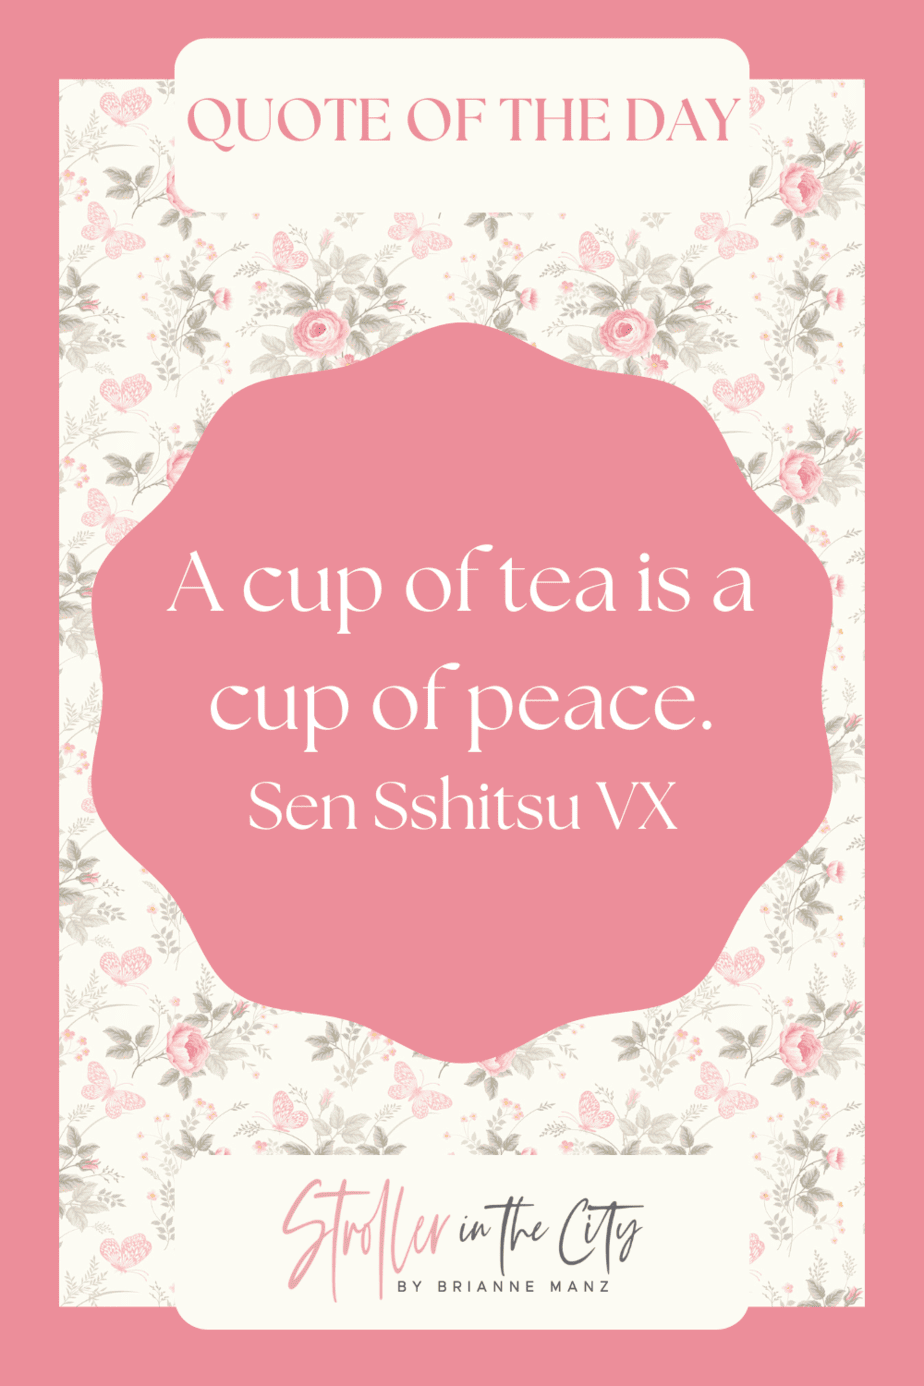 Text:// A cup of tea is a cup of peace